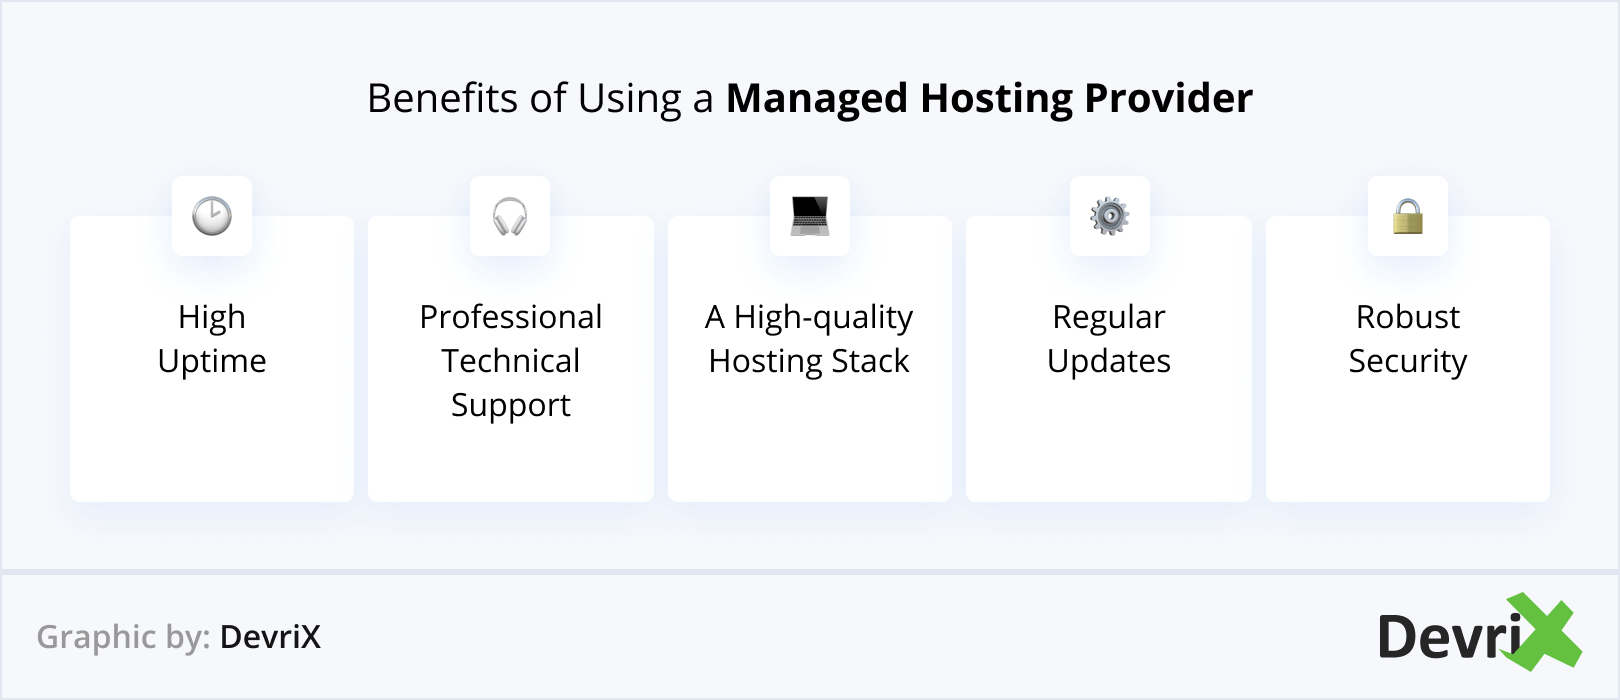 Benefits of Using a Managed Hosting Provider